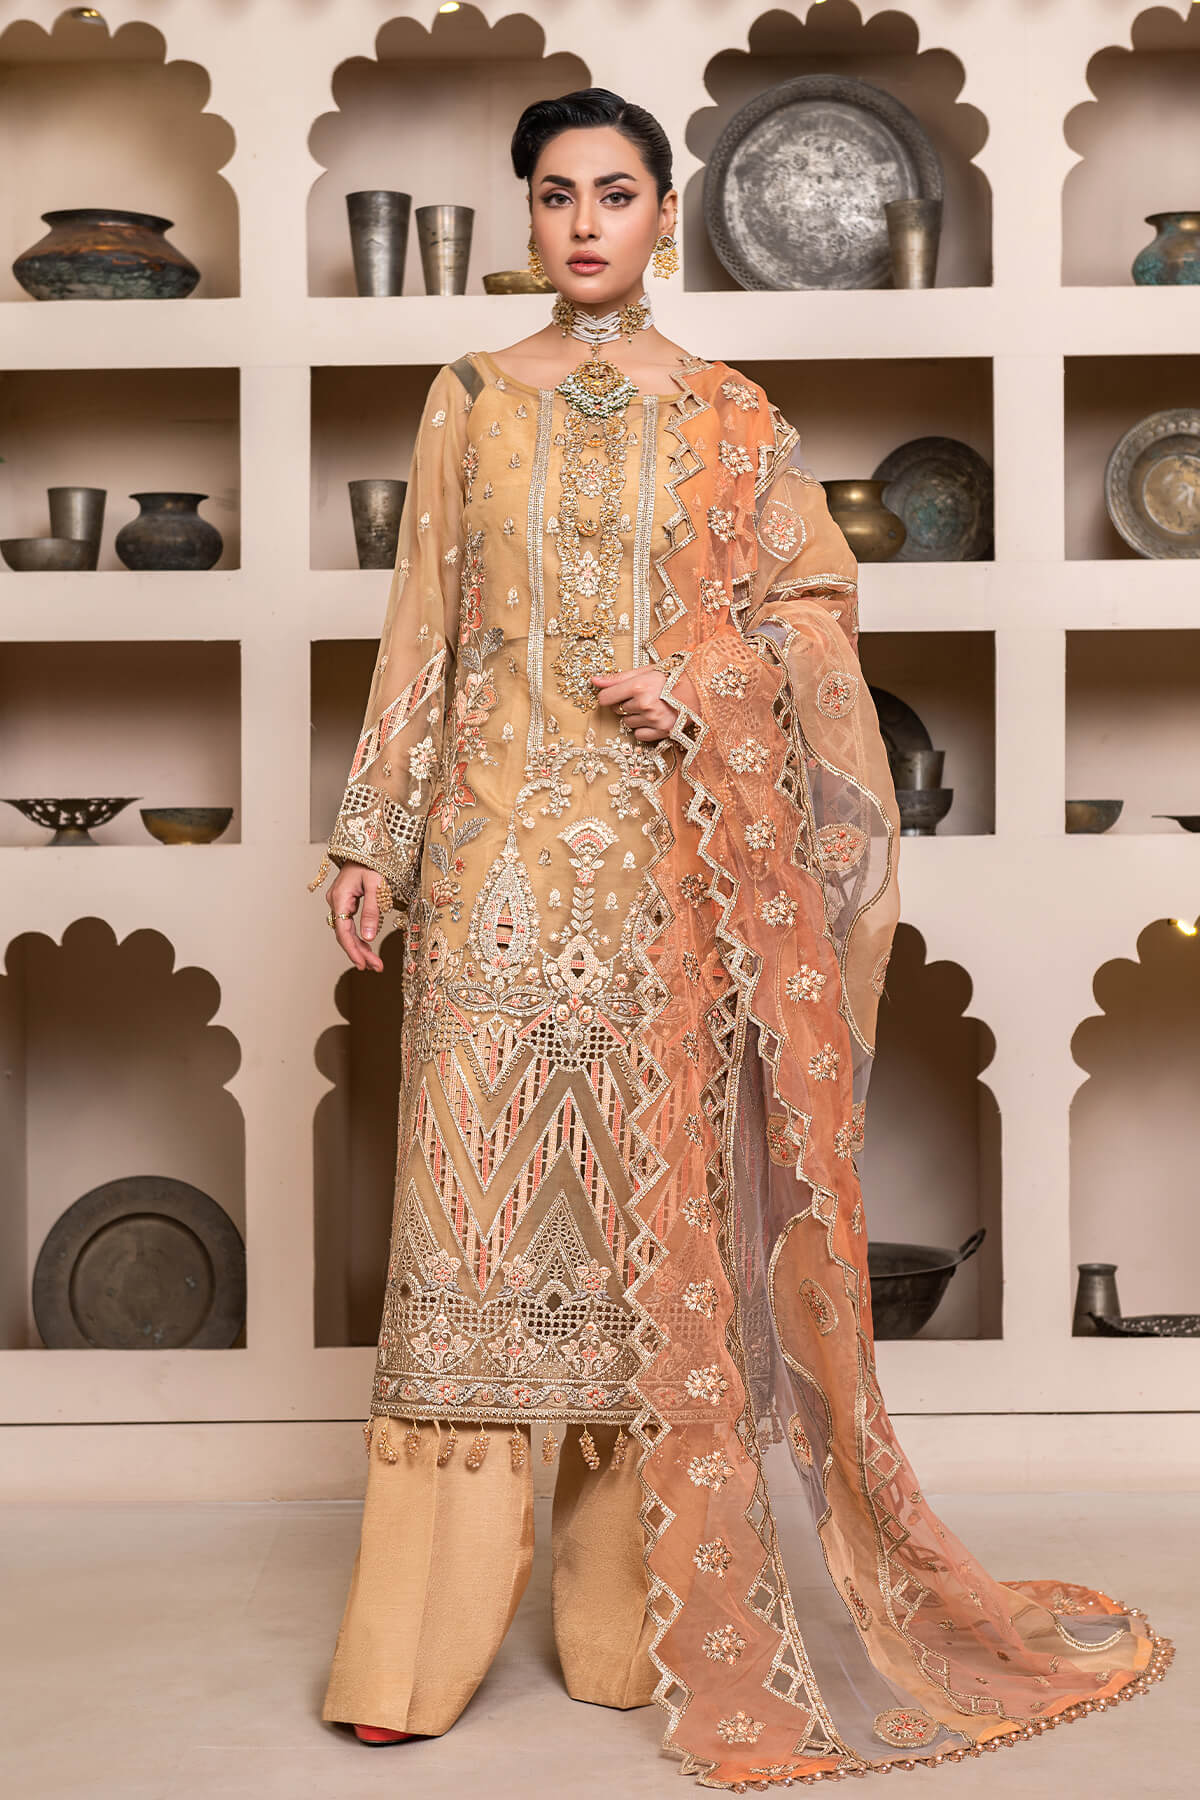 JJ EMBELLISH BY JANIQUE LUXURY EMBROIDERED UNDTITCHED SUIT D-003 Evening Gold